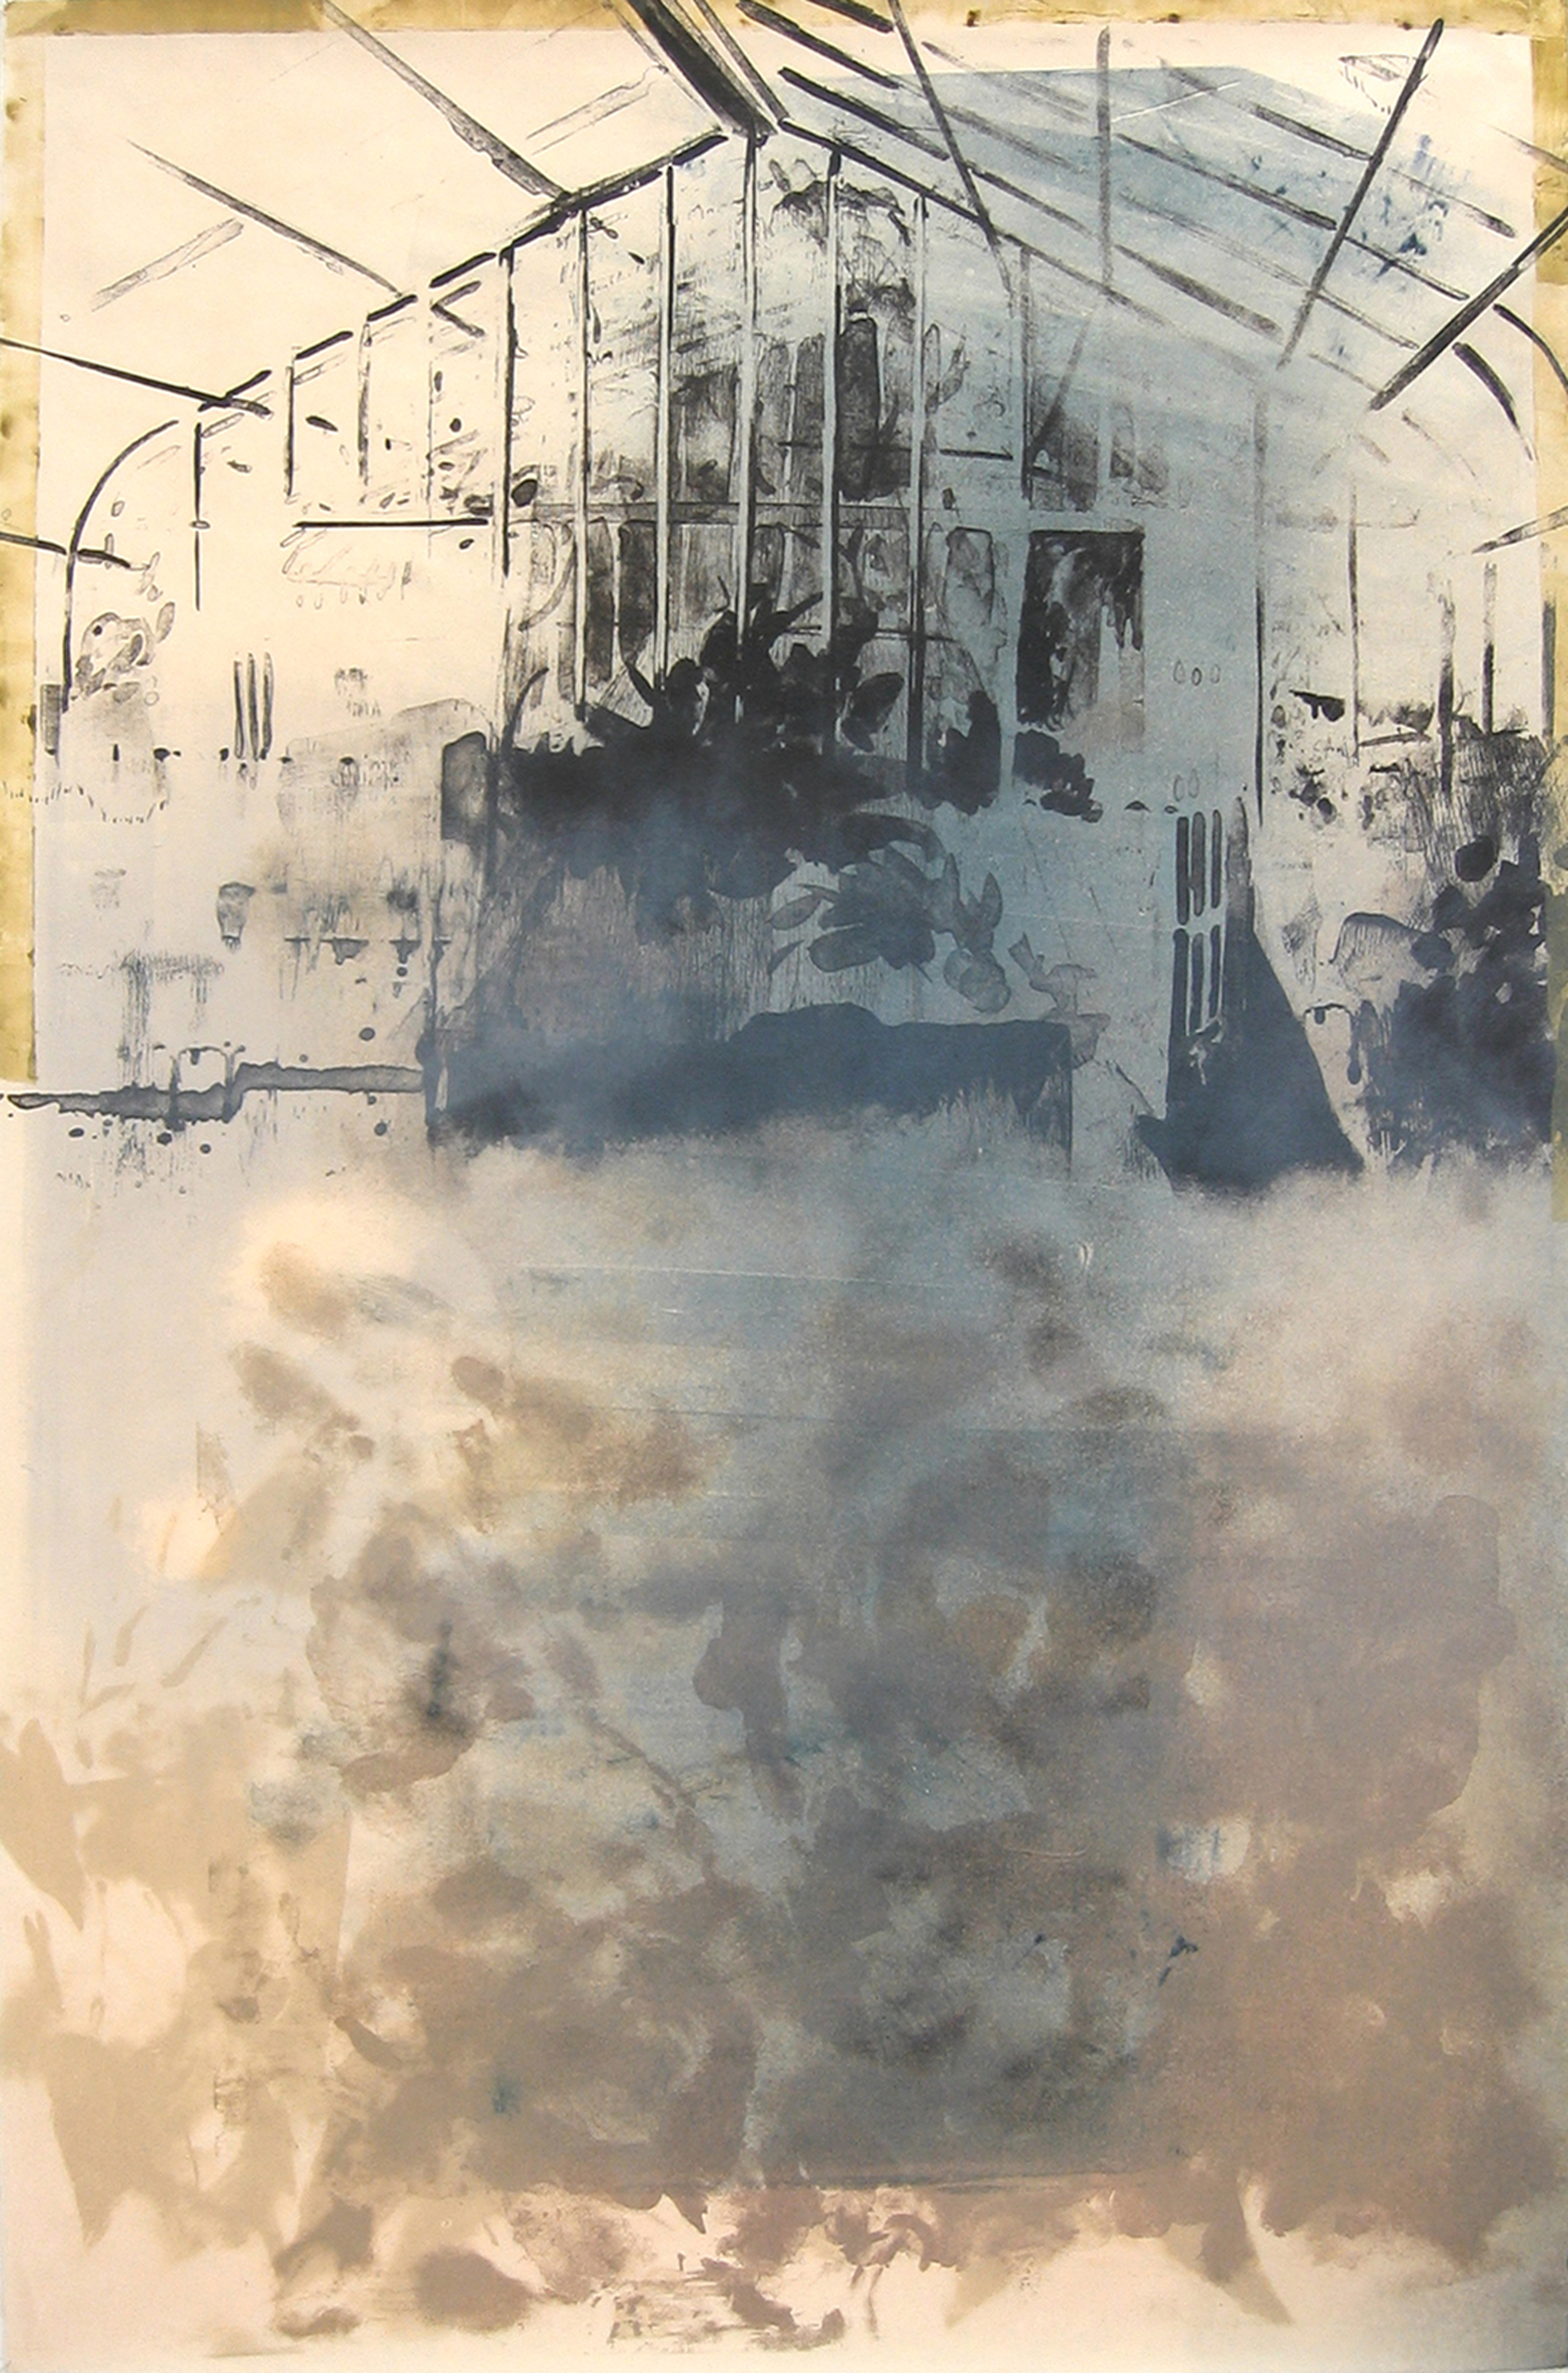    Stone Greenhouse III/III   by Joel Janowitz 2005  From the Stone Greenhouse series | Variable Edition of 3 | Lithography and Monoprinting with Kitakata | 43" x 28" 